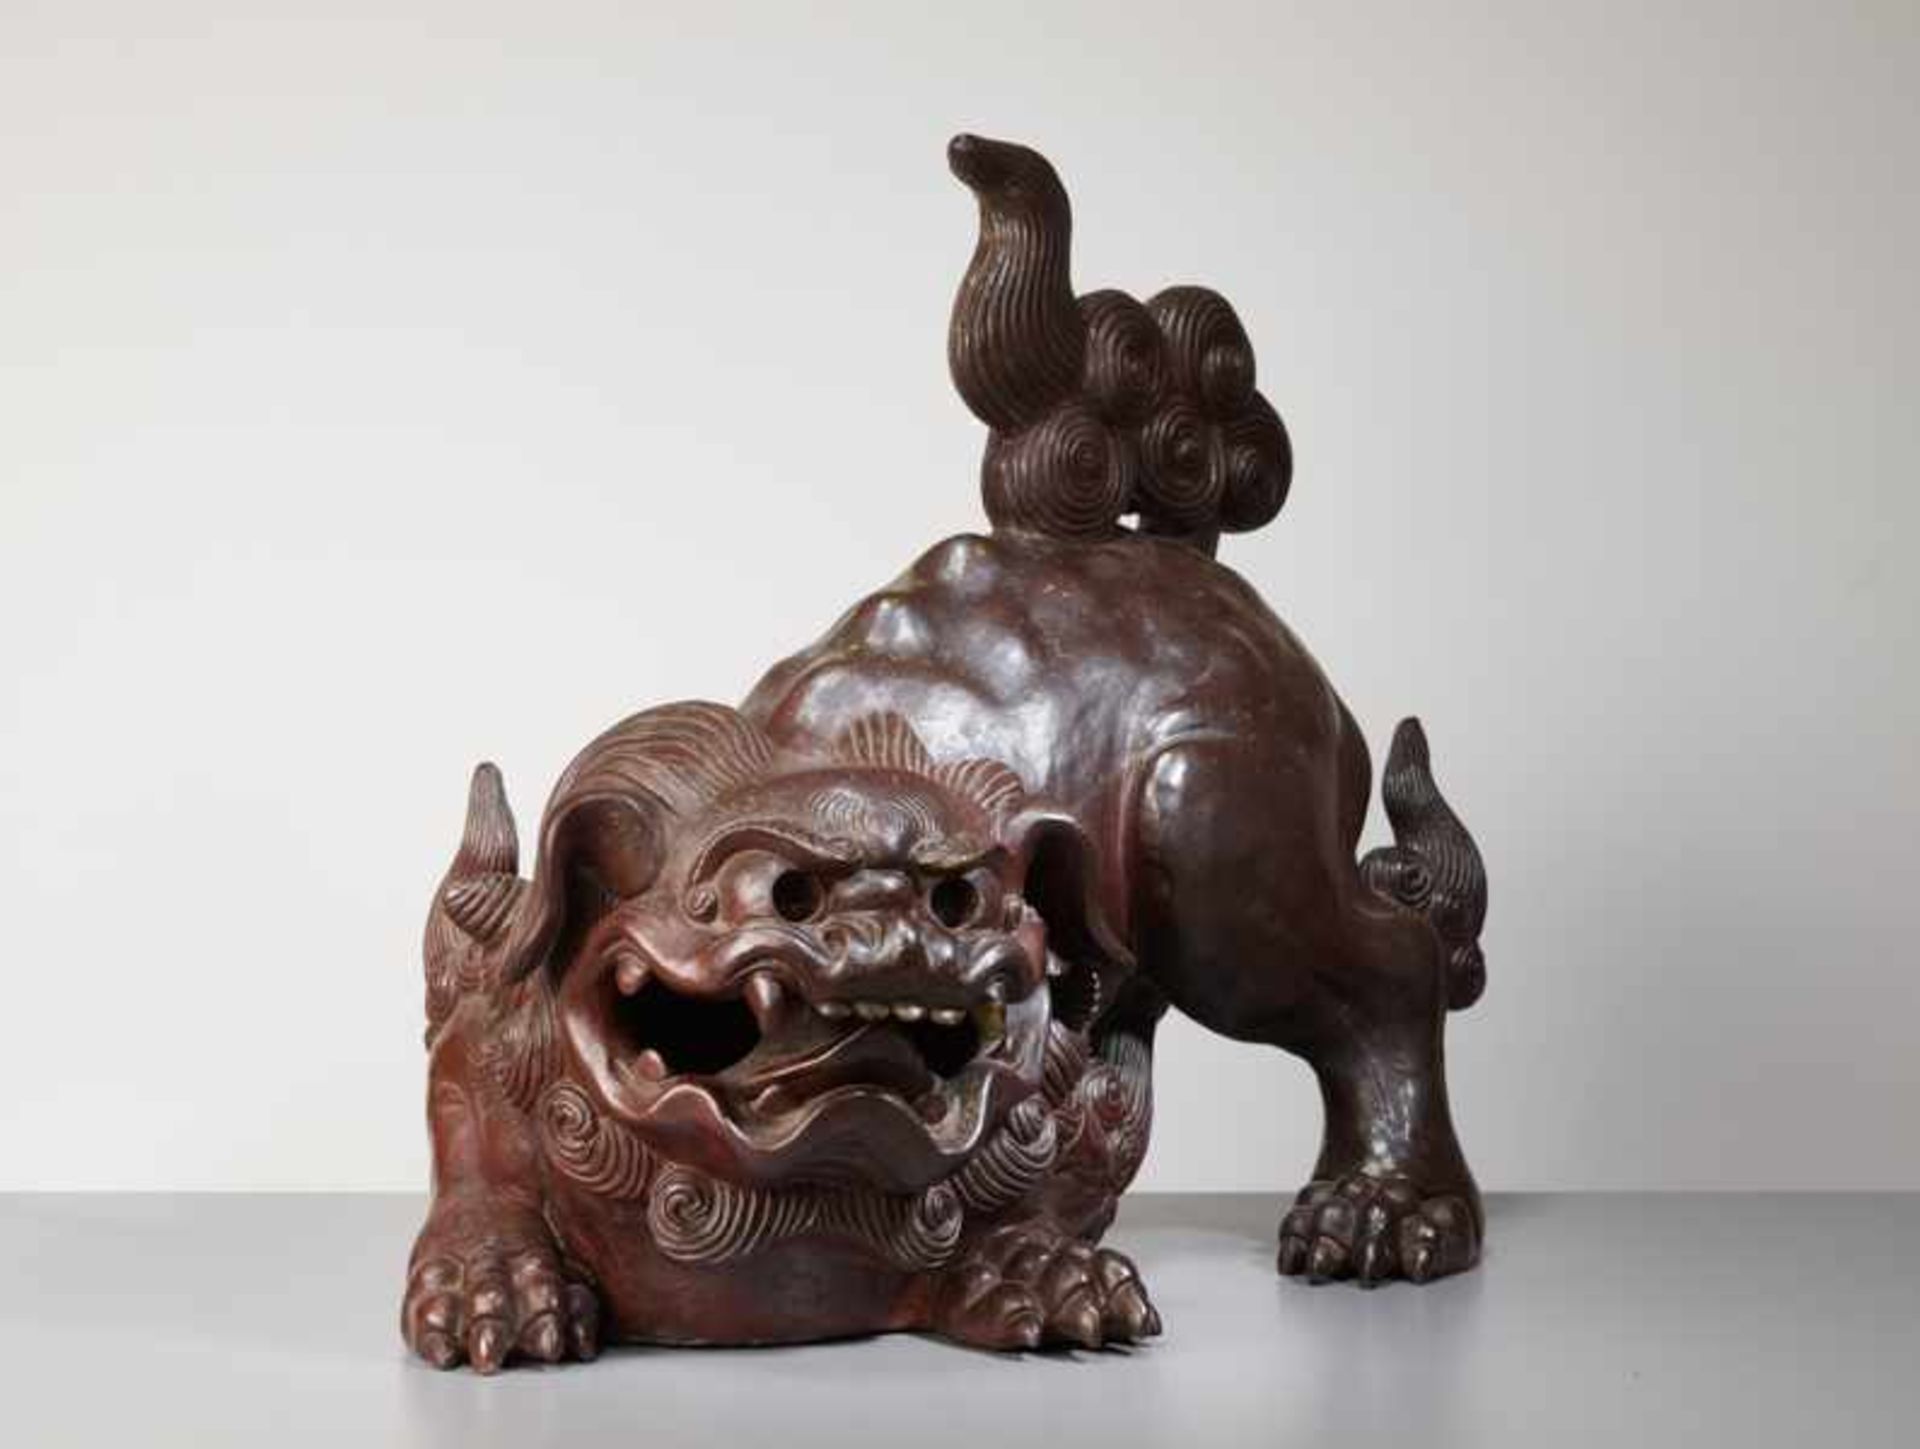 SCULPTURE OF A HISSING SHISHI Fired ceramic. Japan, Meiji periodExceptional and massive sculpture of - Image 4 of 7